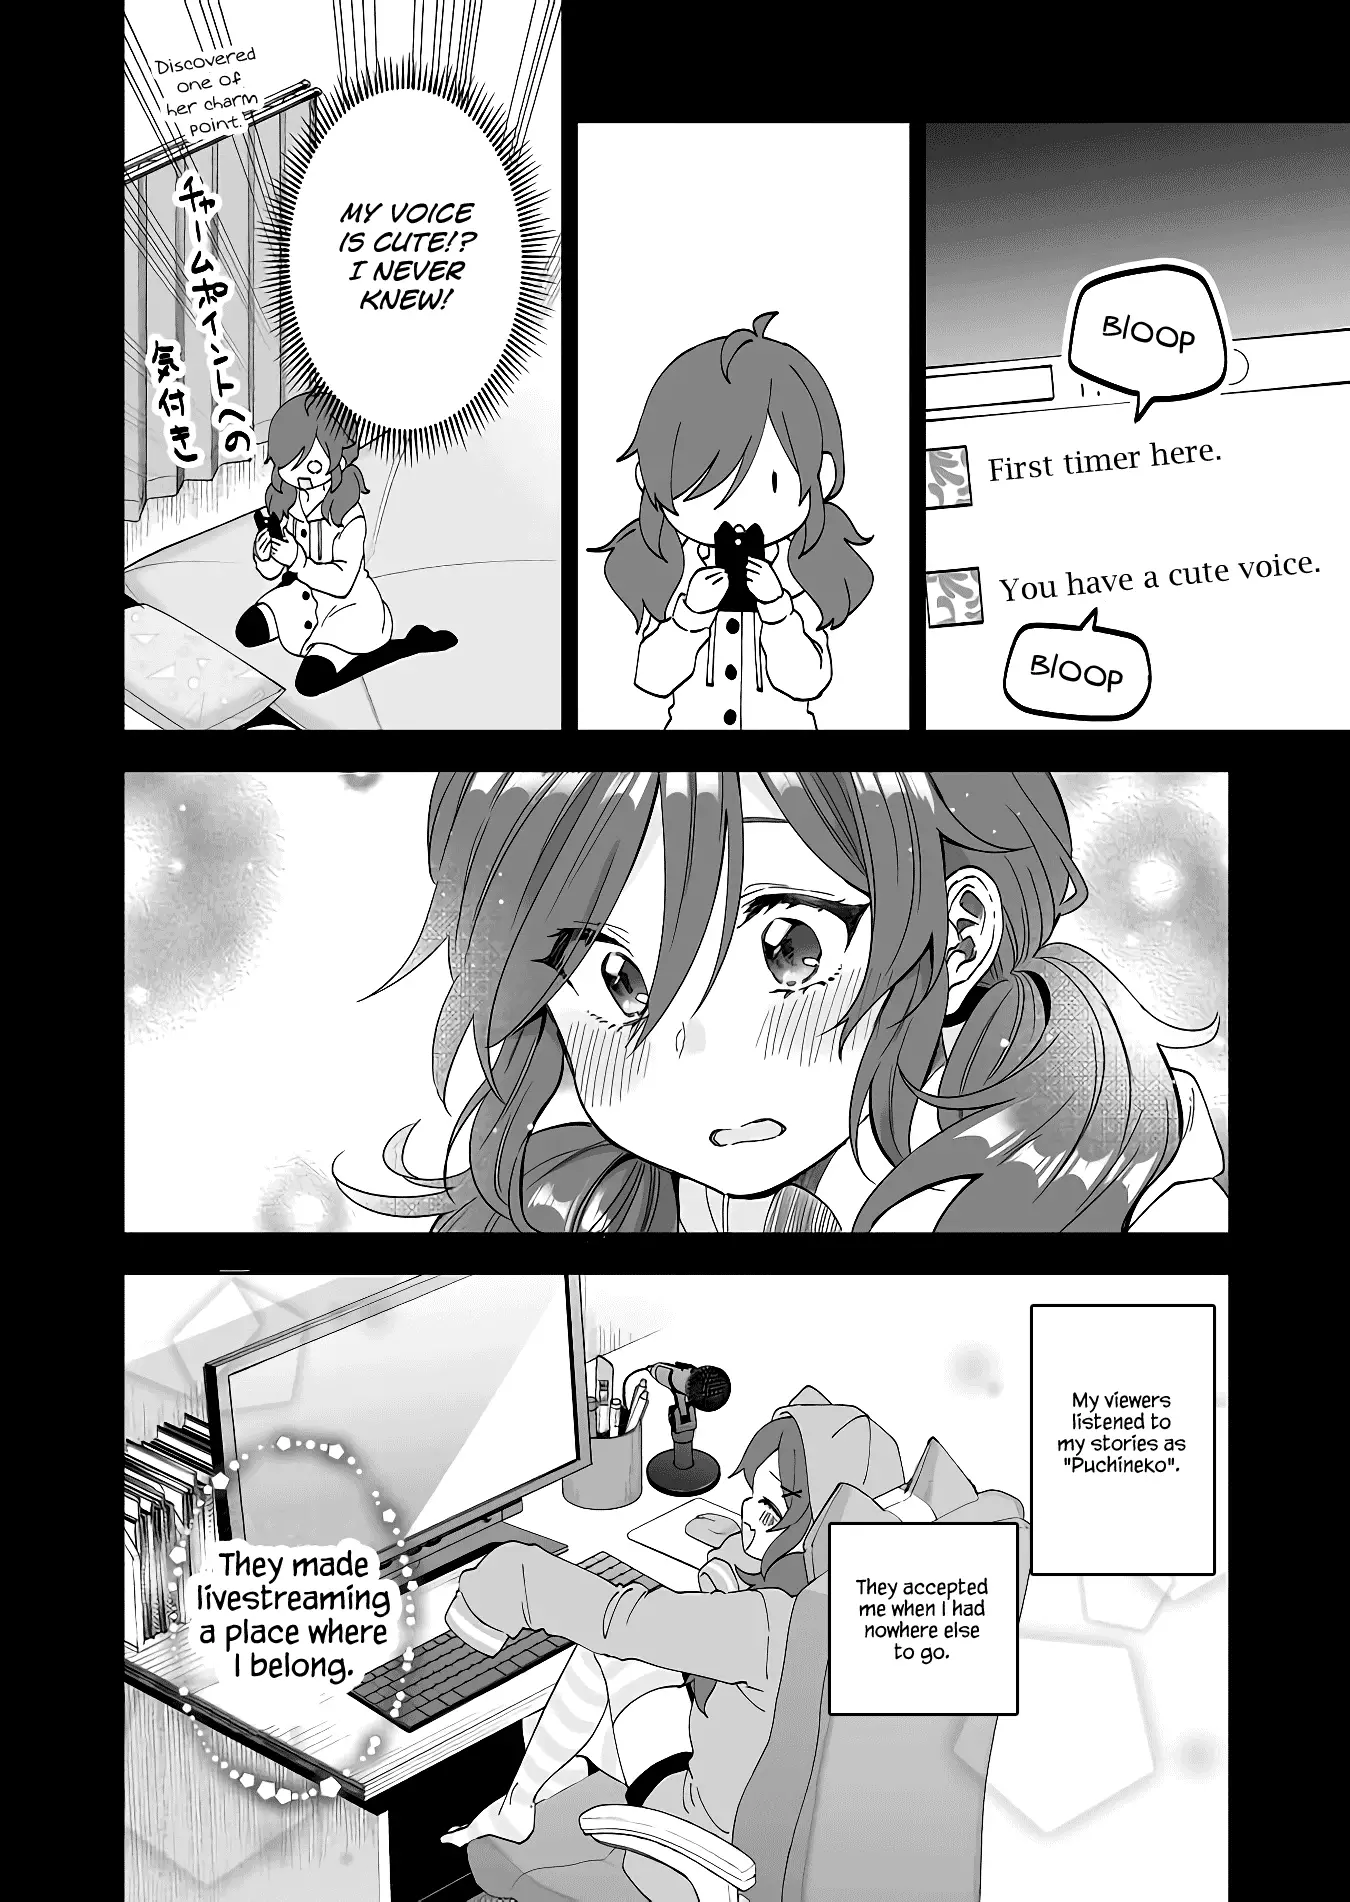 I Fell In Love, So I Tried Livestreaming - 60 page 4